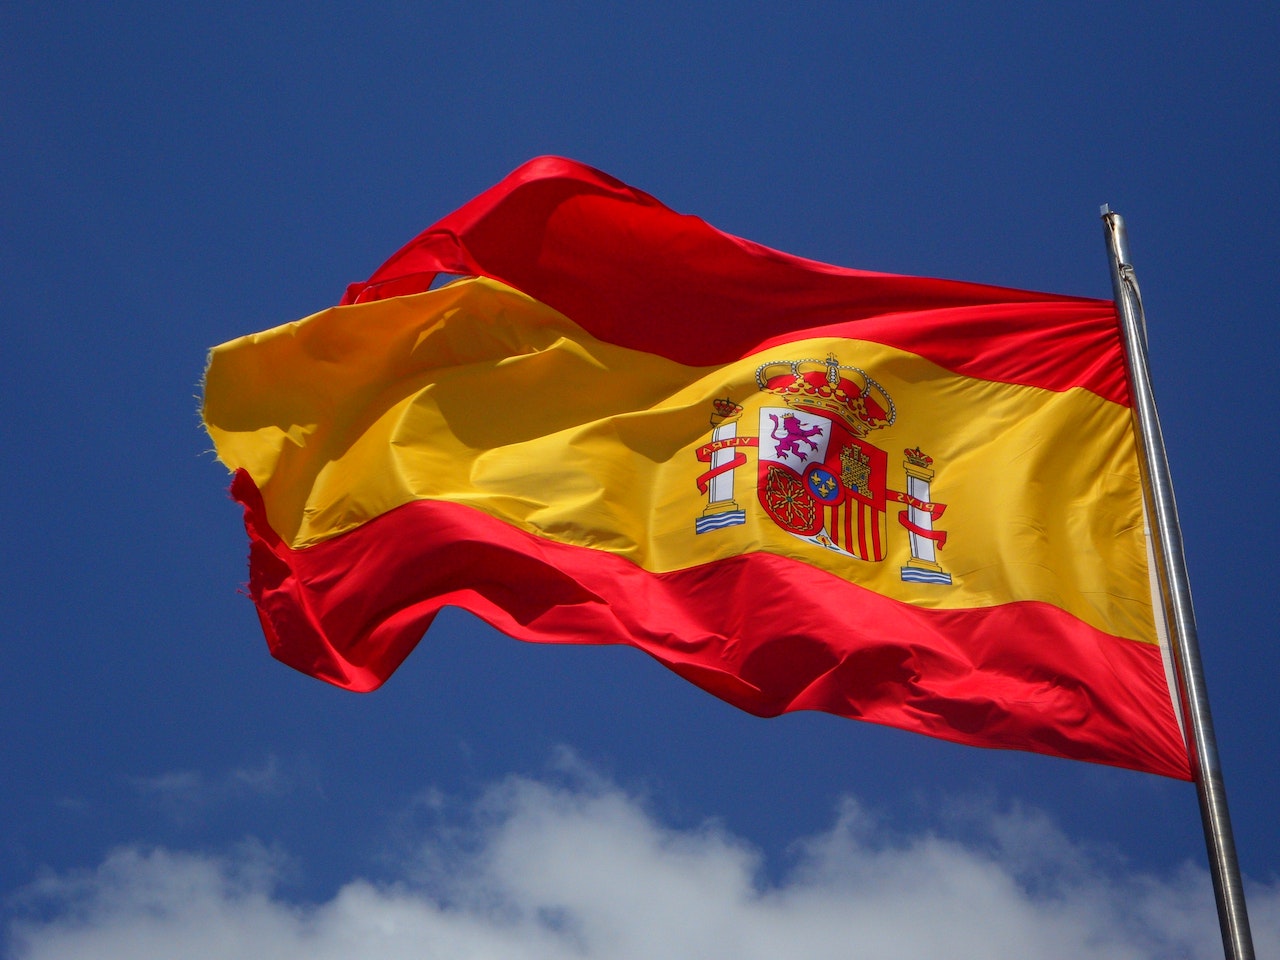 Spain's Economic Woes and the Impact on Foreign Investment